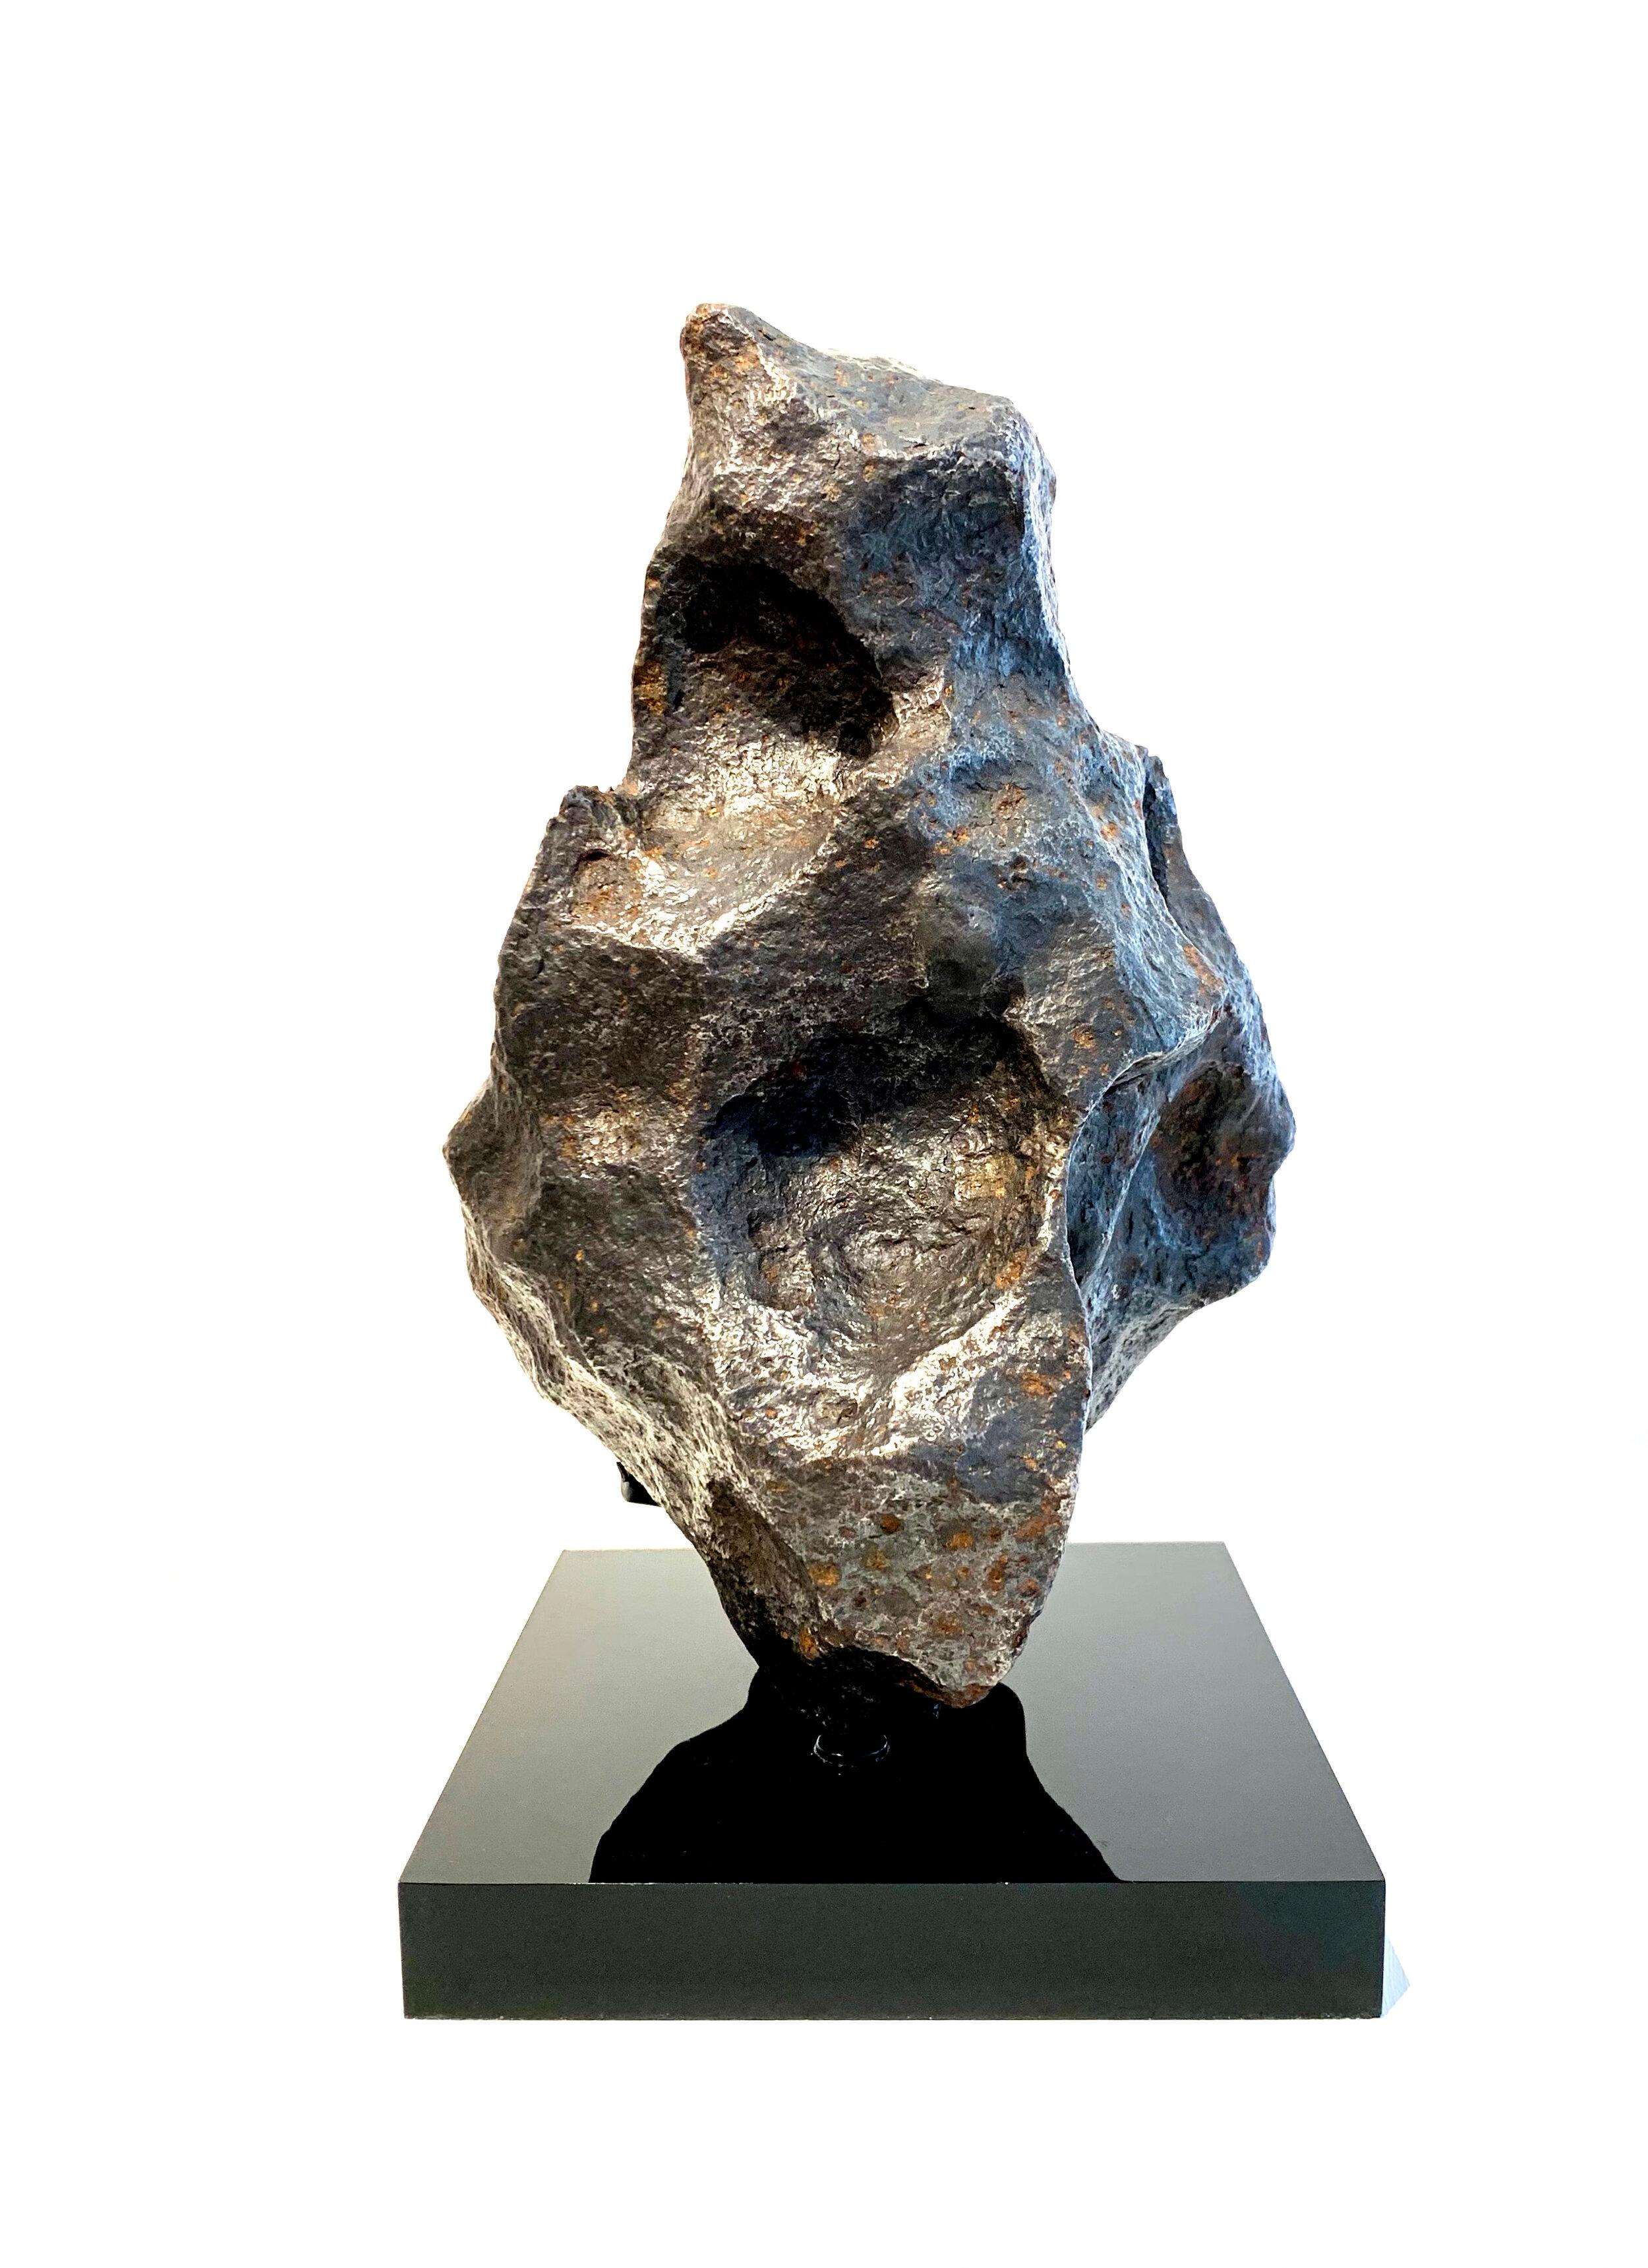 Iron Meteorite. Campo del Cielo, Argentina. Circa 4.5 billion years old. Sold with bespoke acrylic display stand

Natural History. From rare dinosaur skulls and Stone Age tools to the world’s earliest animals that date back millions of years, the